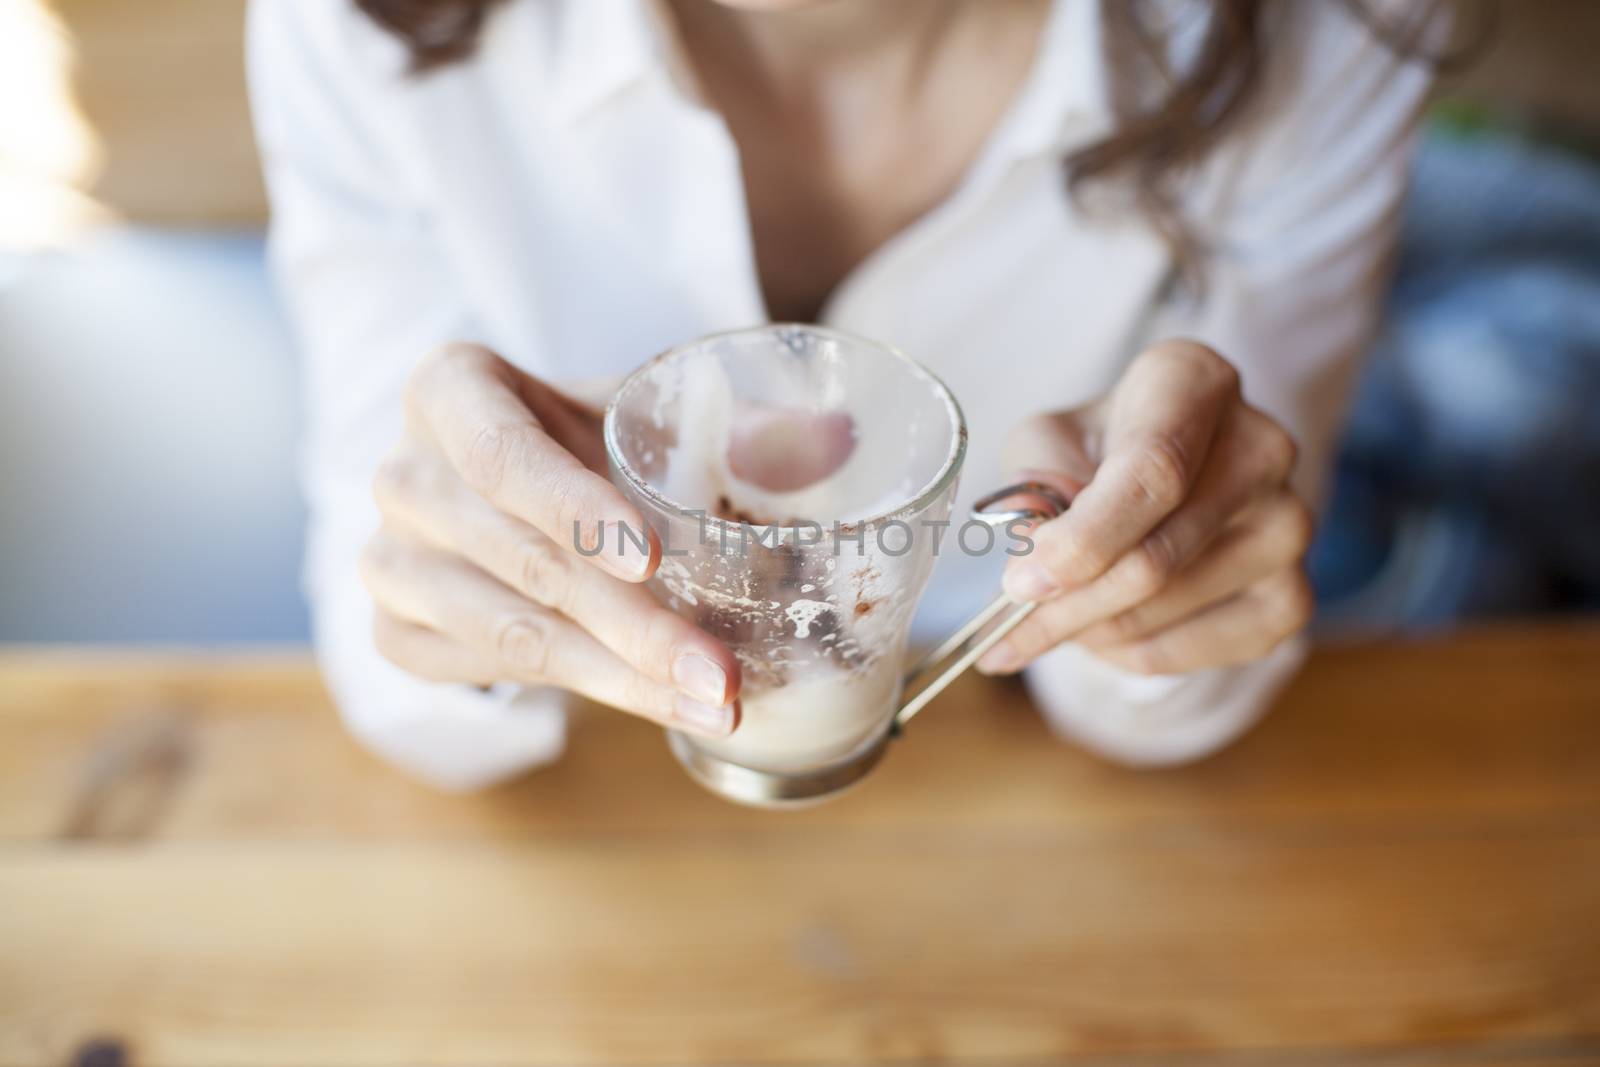 empty finished cappuccino coffee cup in hands of woman with white shirt on light brown wooden table cafe